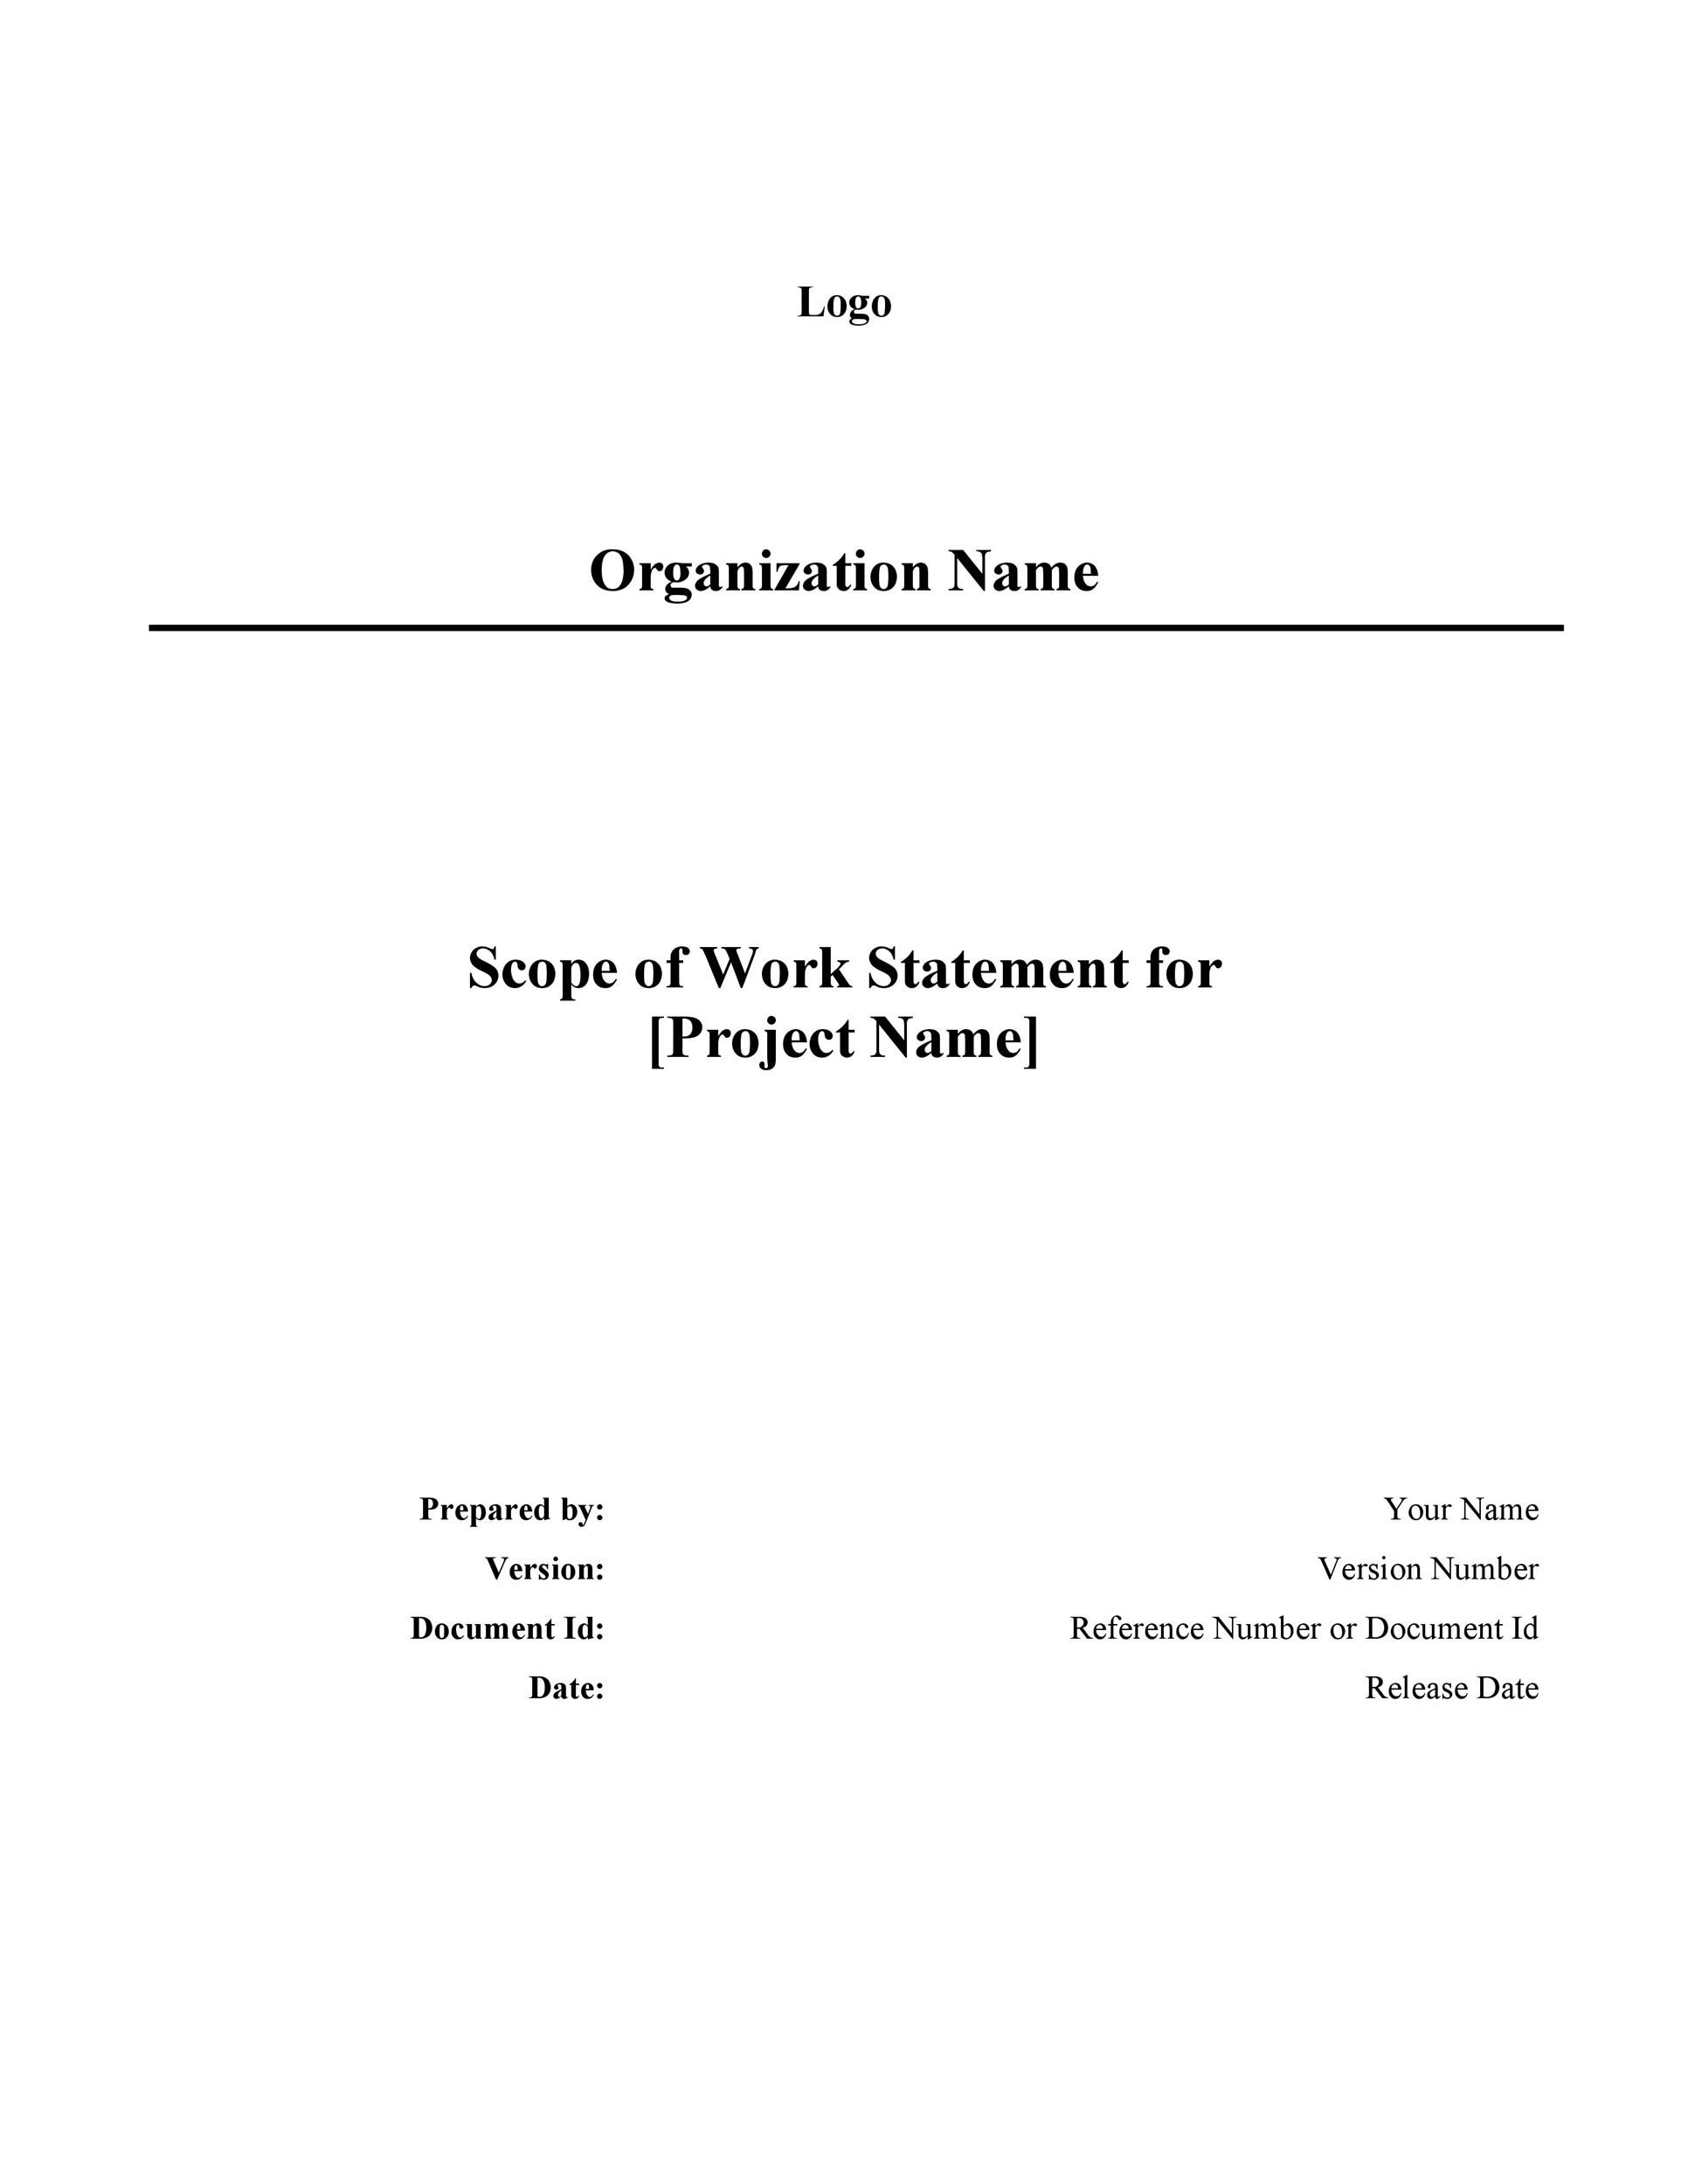 scope-of-work-template-36-free-word-pdf-documents-download